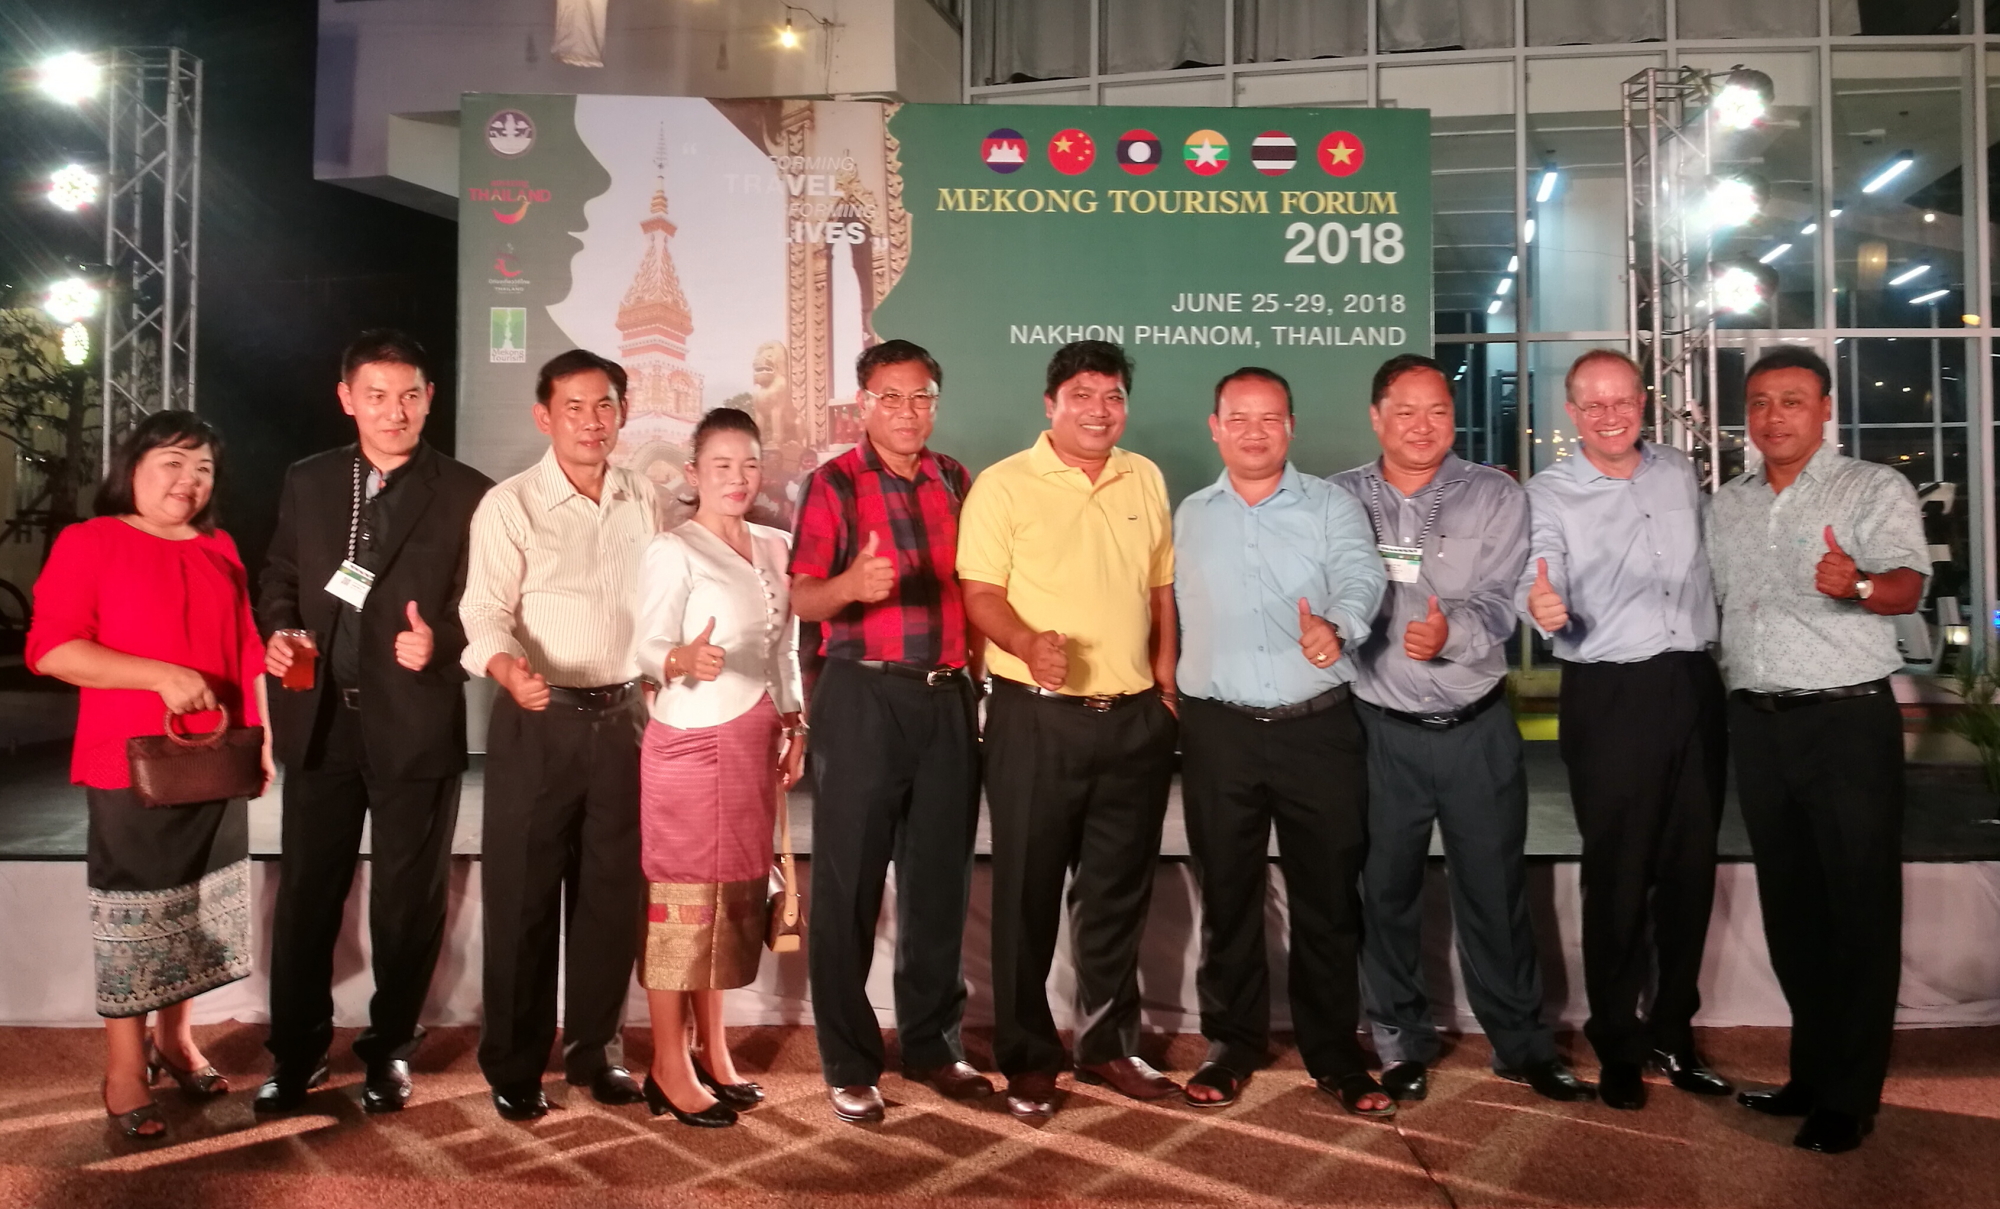 The 21st edition of the Mekong Tourism Forum is taking place in Nakhon Phanom, Thailand from 25-29 June 2018. Click to enlarge.